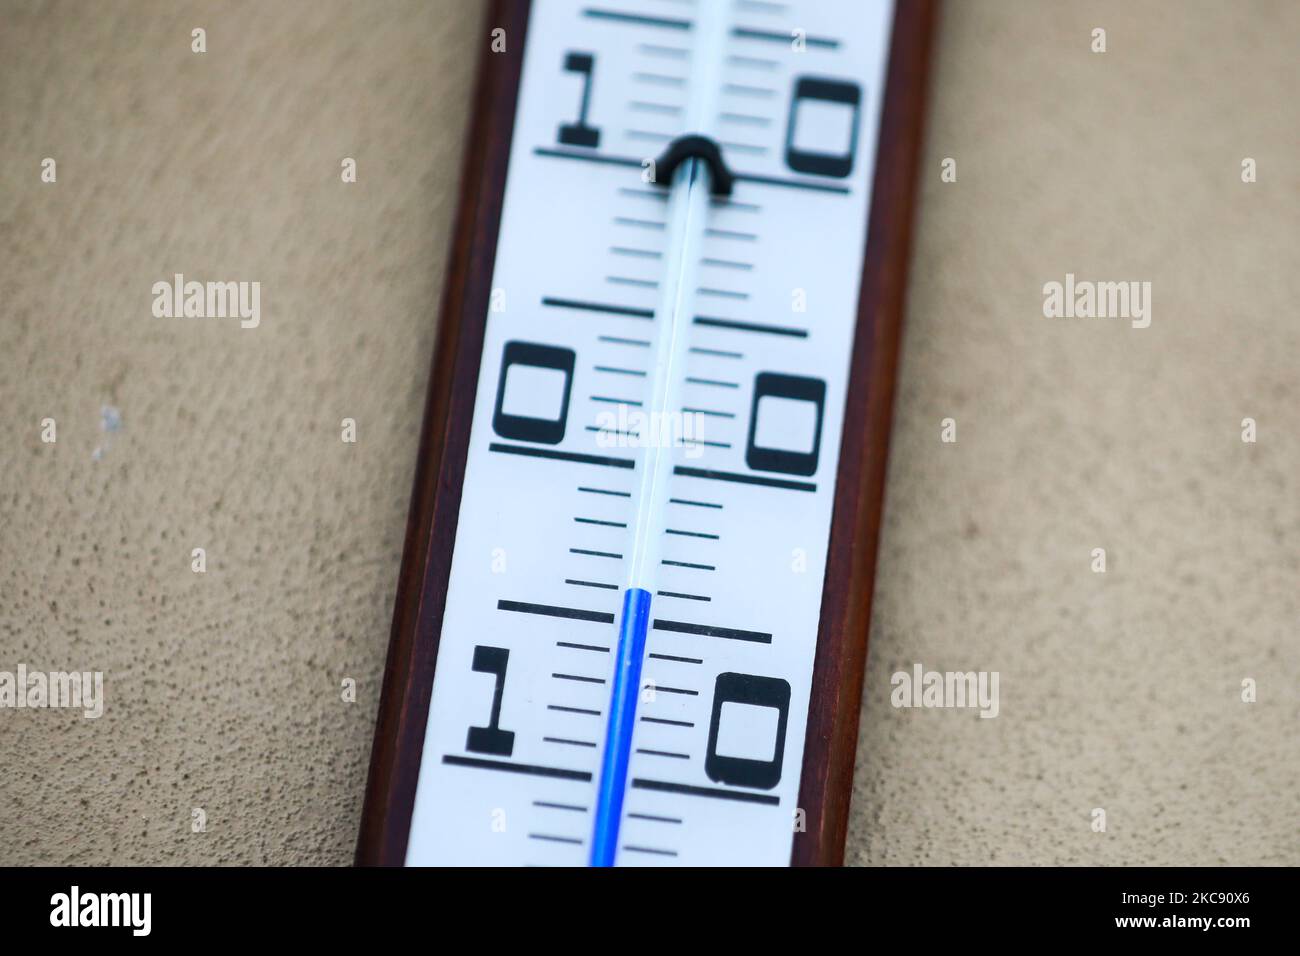 https://c8.alamy.com/comp/2KC90X6/a-thermometer-at-the-main-square-shows-4c-in-krakow-poland-on-february-8-2021-photo-by-beata-zawrzelnurphoto-2KC90X6.jpg